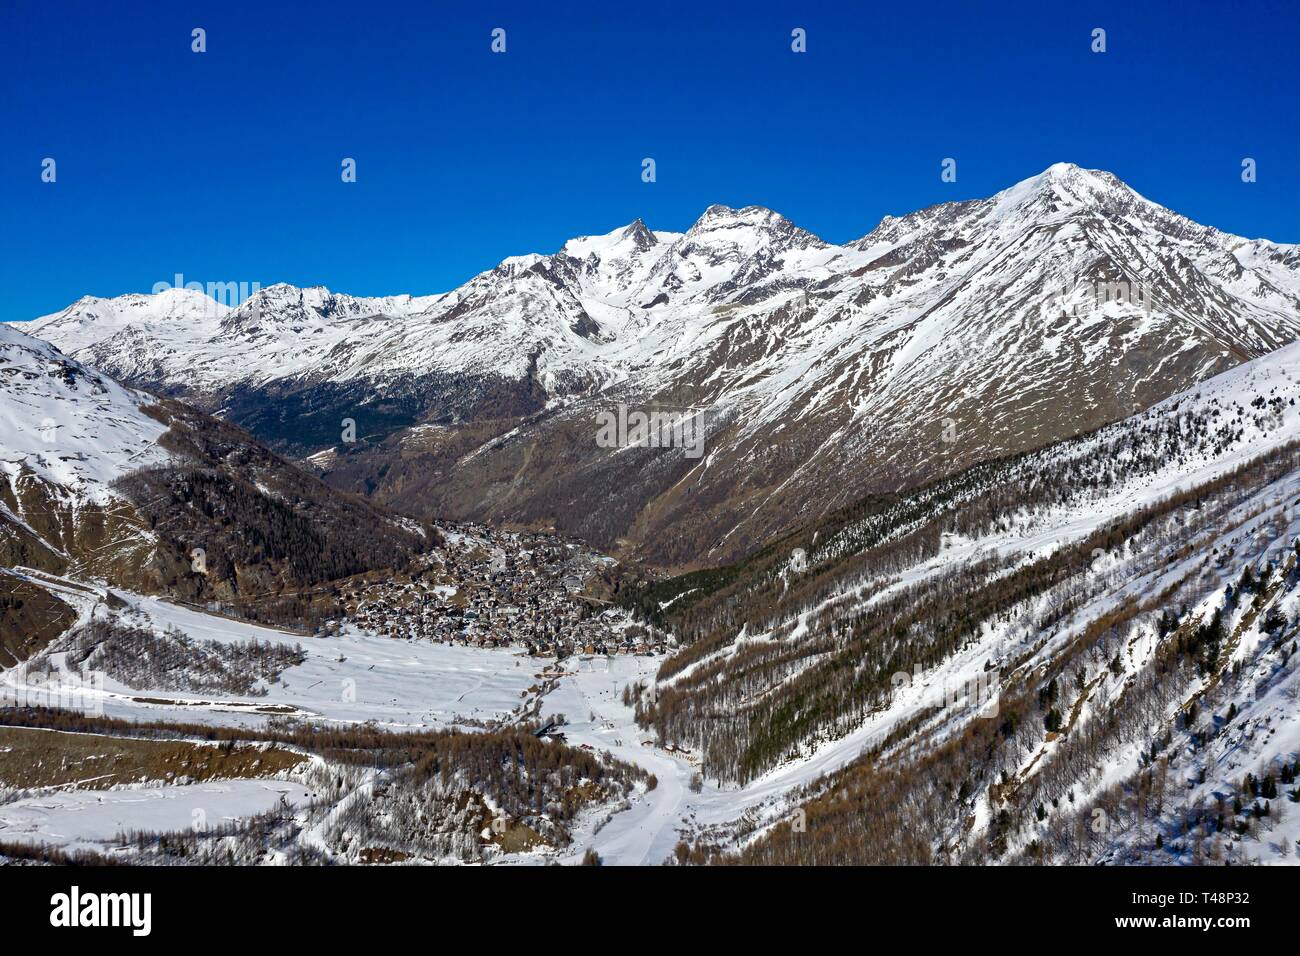 Saas-Fee in the valley, Fletschhorn, Lagginhorn and Weismies peaks at the back, mountain landscape in winter, Valais, Switzerland Stock Photo